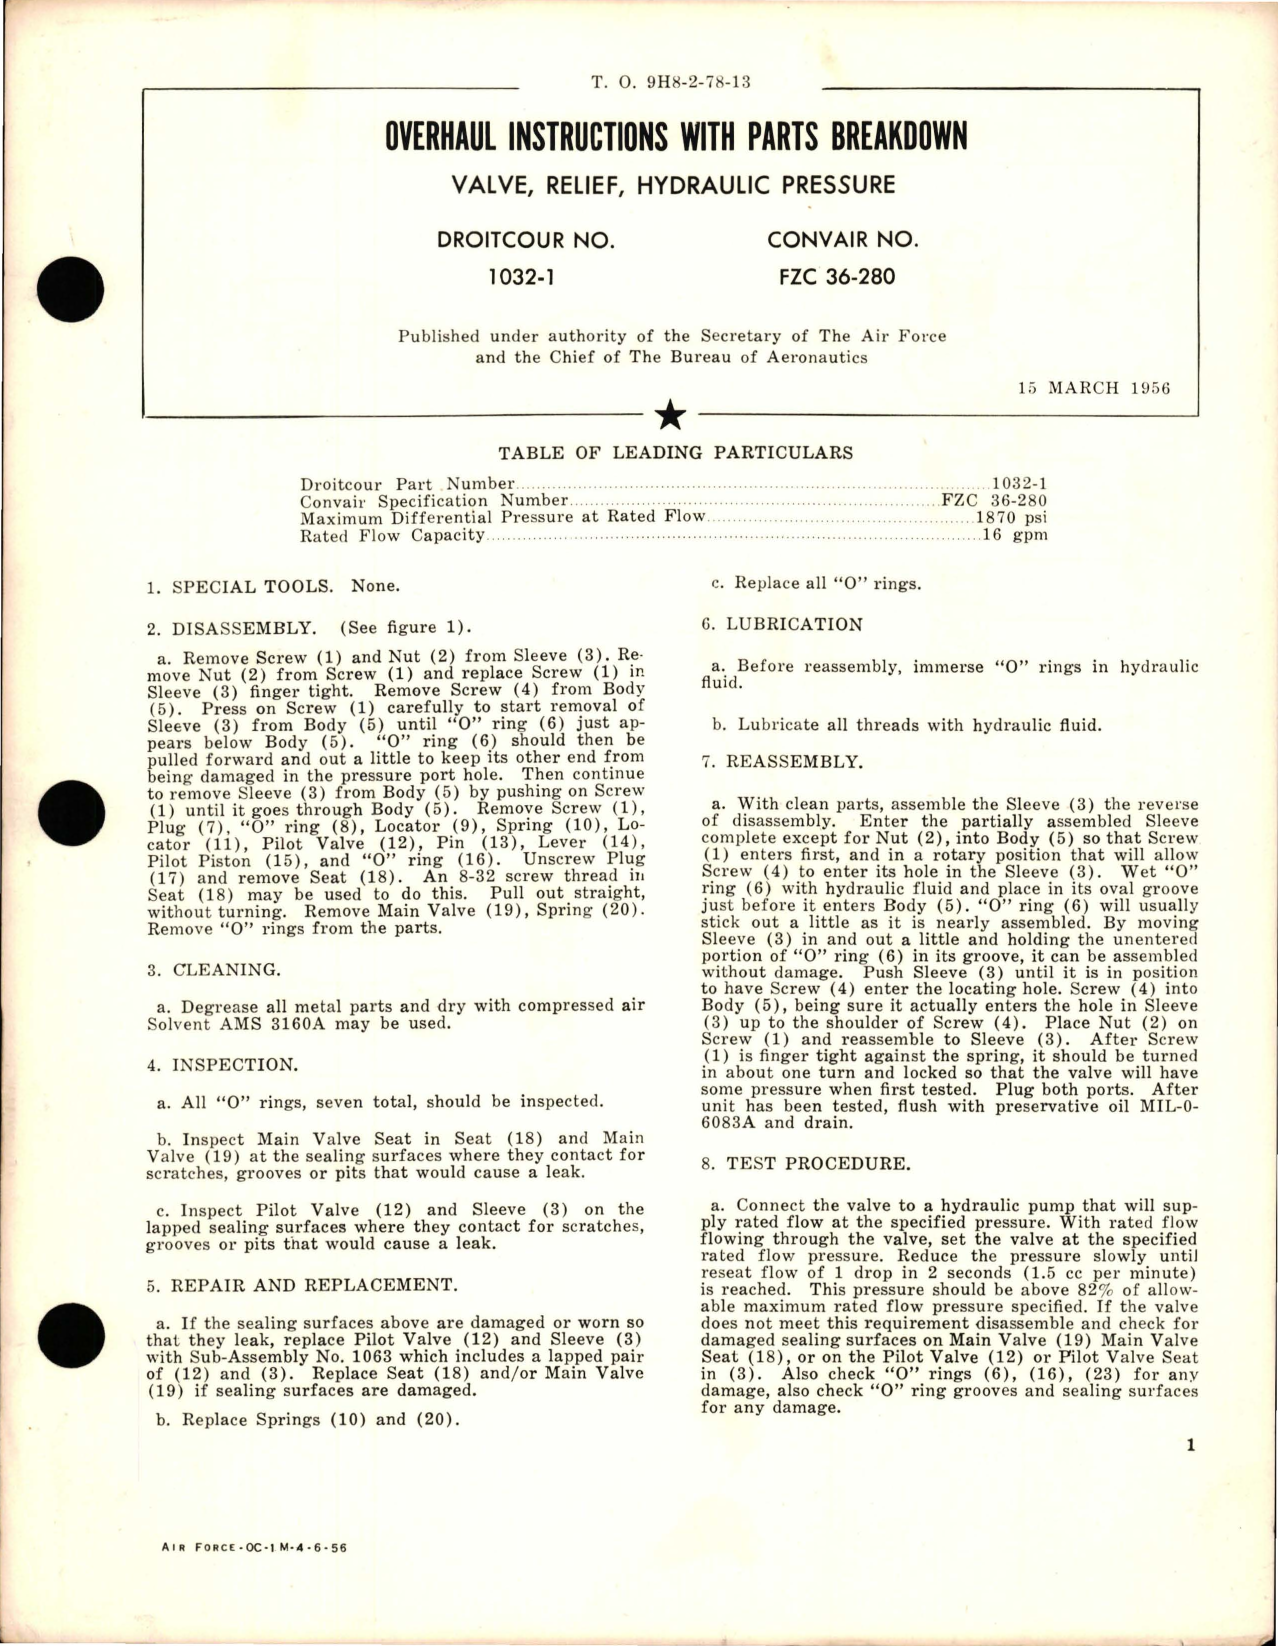 Sample page 1 from AirCorps Library document: Overhaul Instructions with Parts Breakdown for Hydraulic Pressure Relief Valve - 1032-1 and FZC 36-280